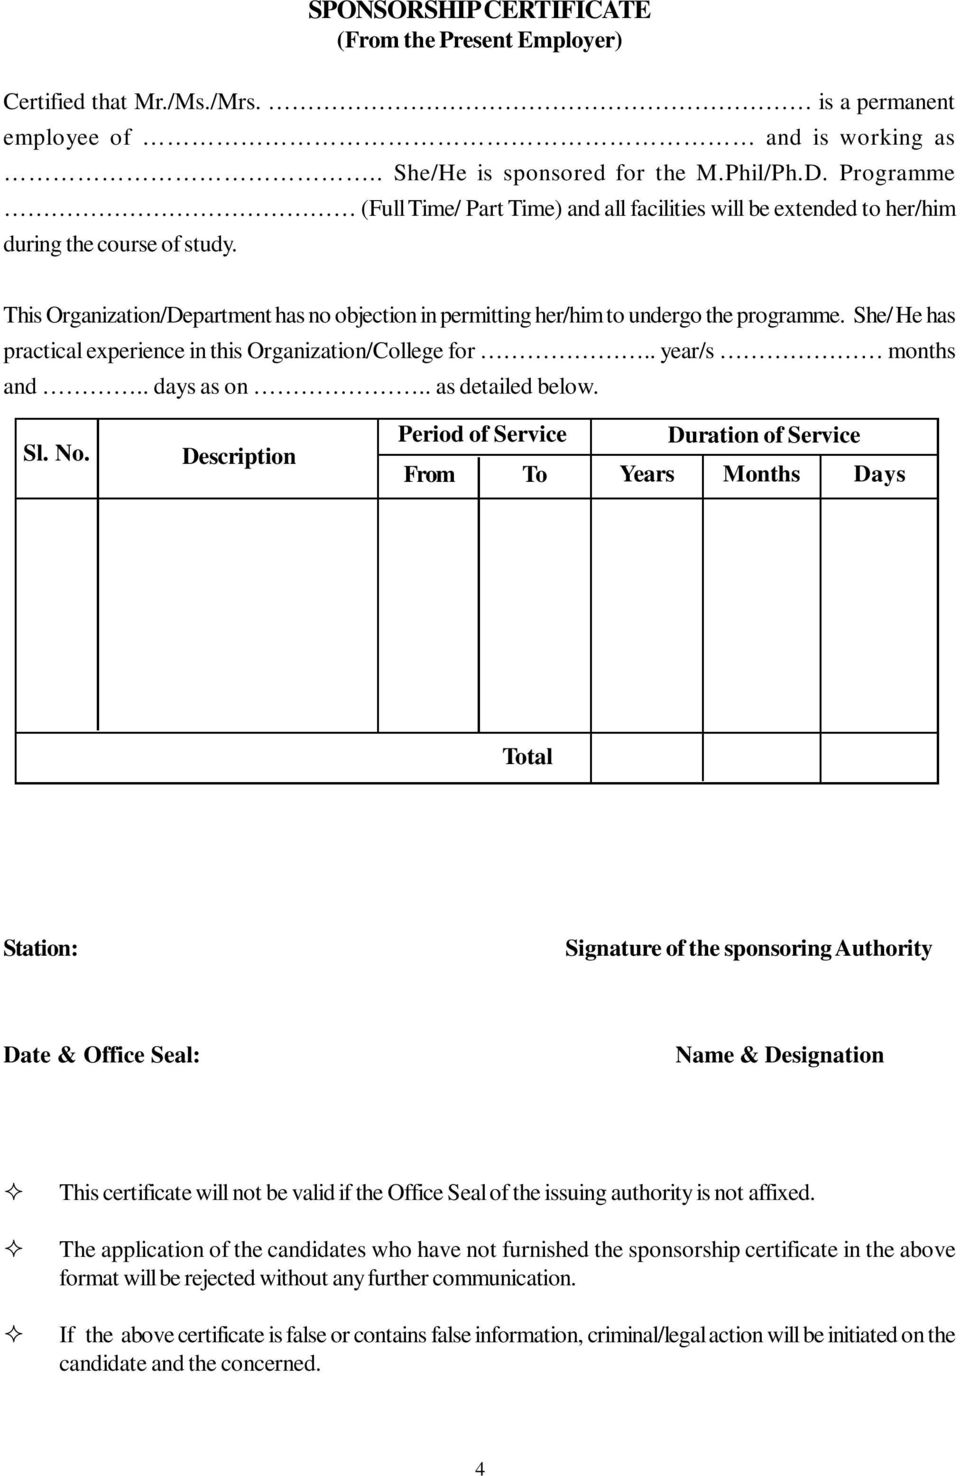 This Organization/Department has no objection in permitting her/him to undergo the programme. She/ He has practical experience in this Organization/College for.. year/s months and.. days as on.